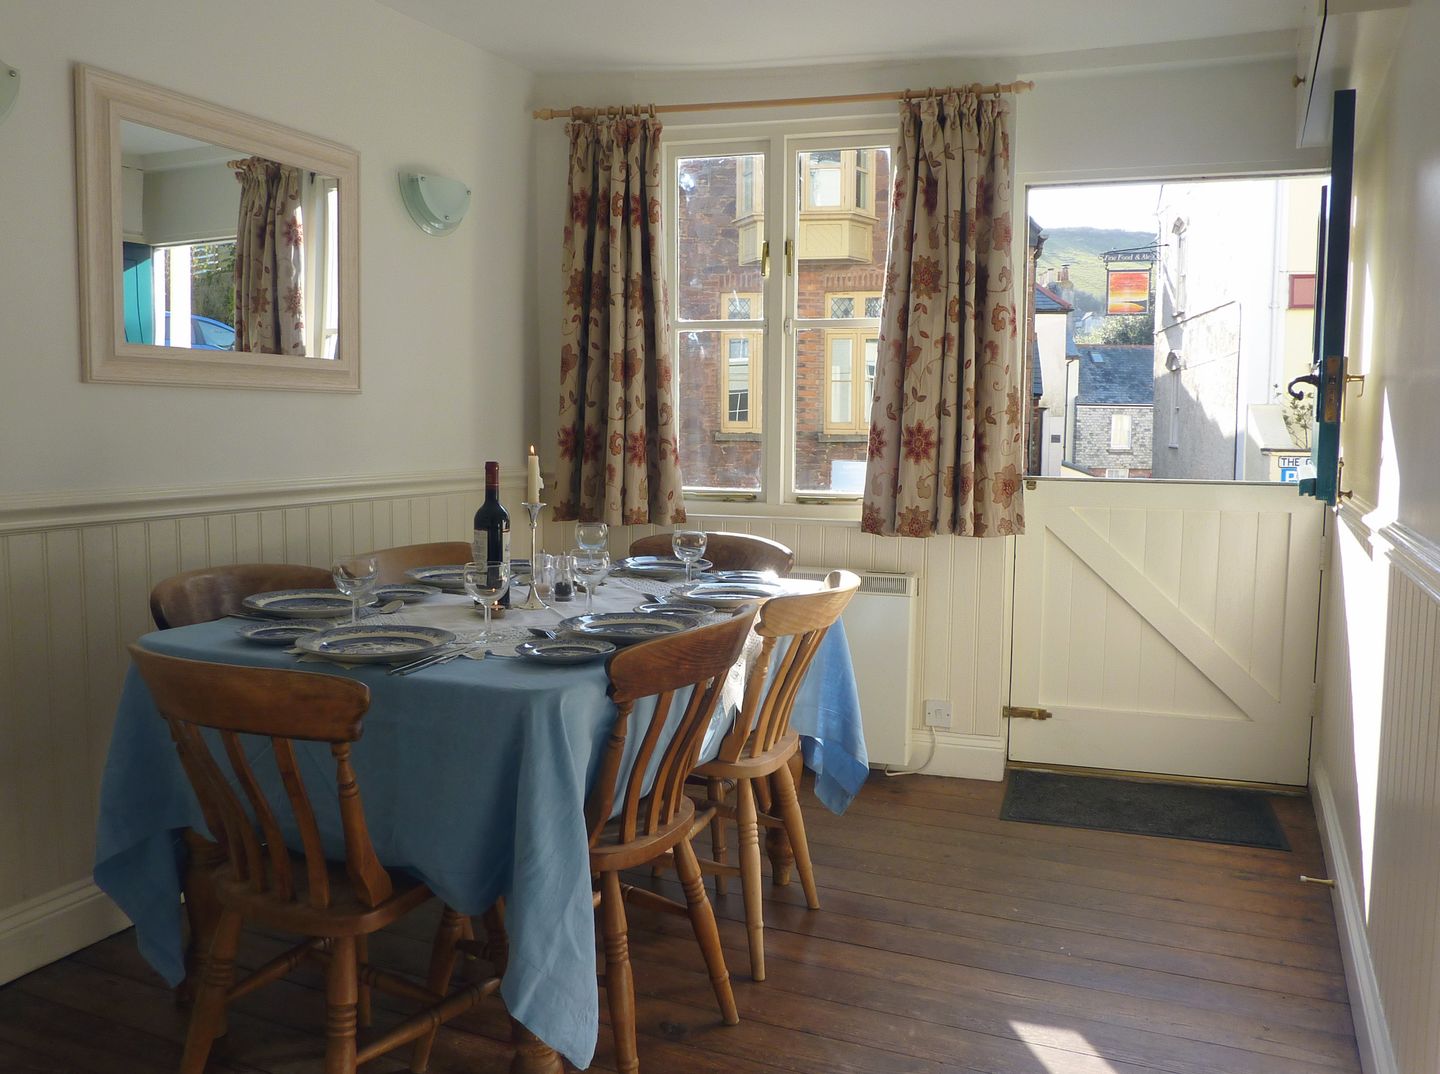 Penlee Narrows Dining Room With Stable Doors